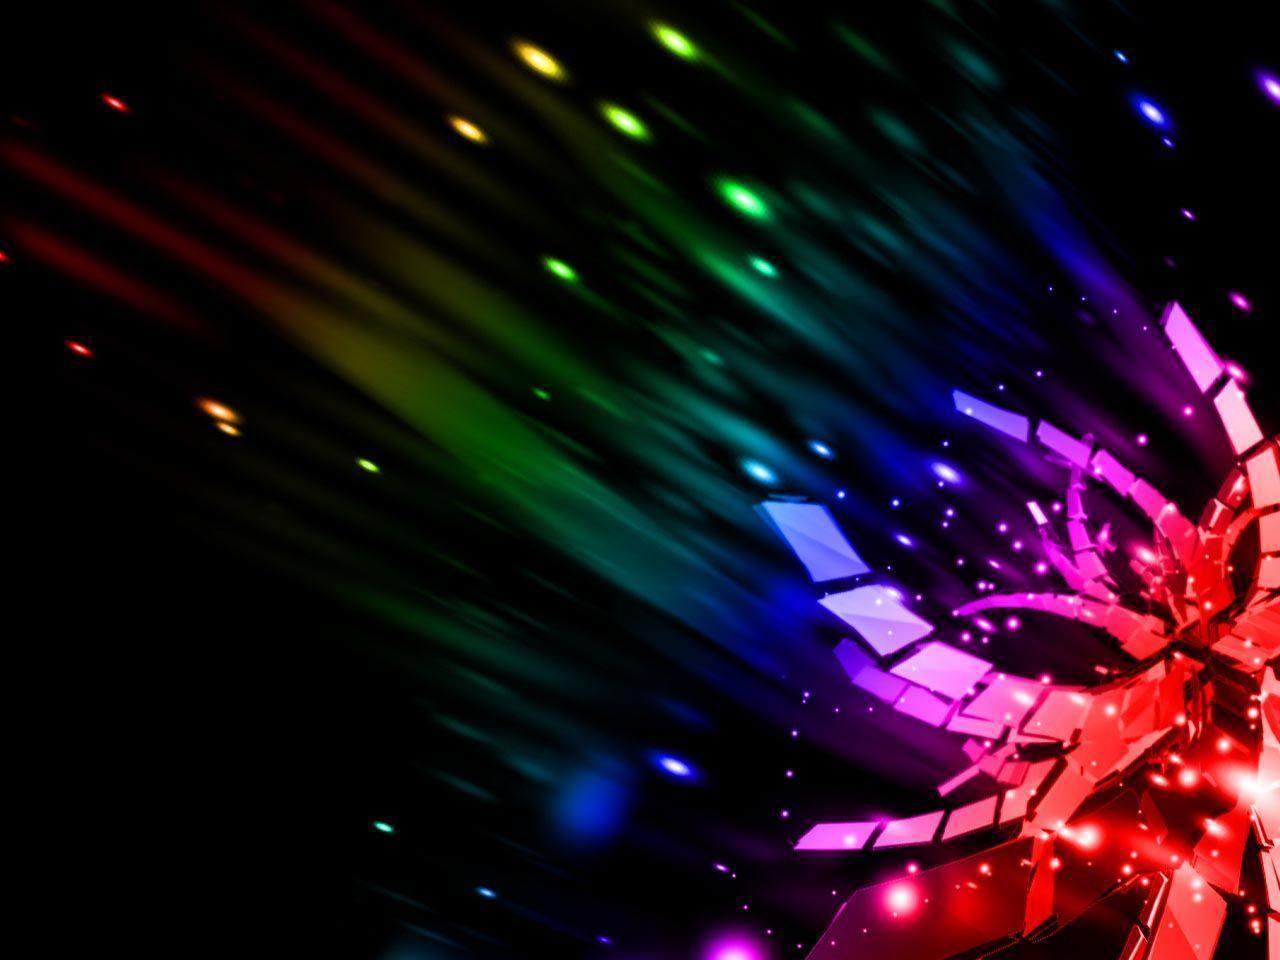 cool neon wallpaper 10 - Image And Wallpaper free to